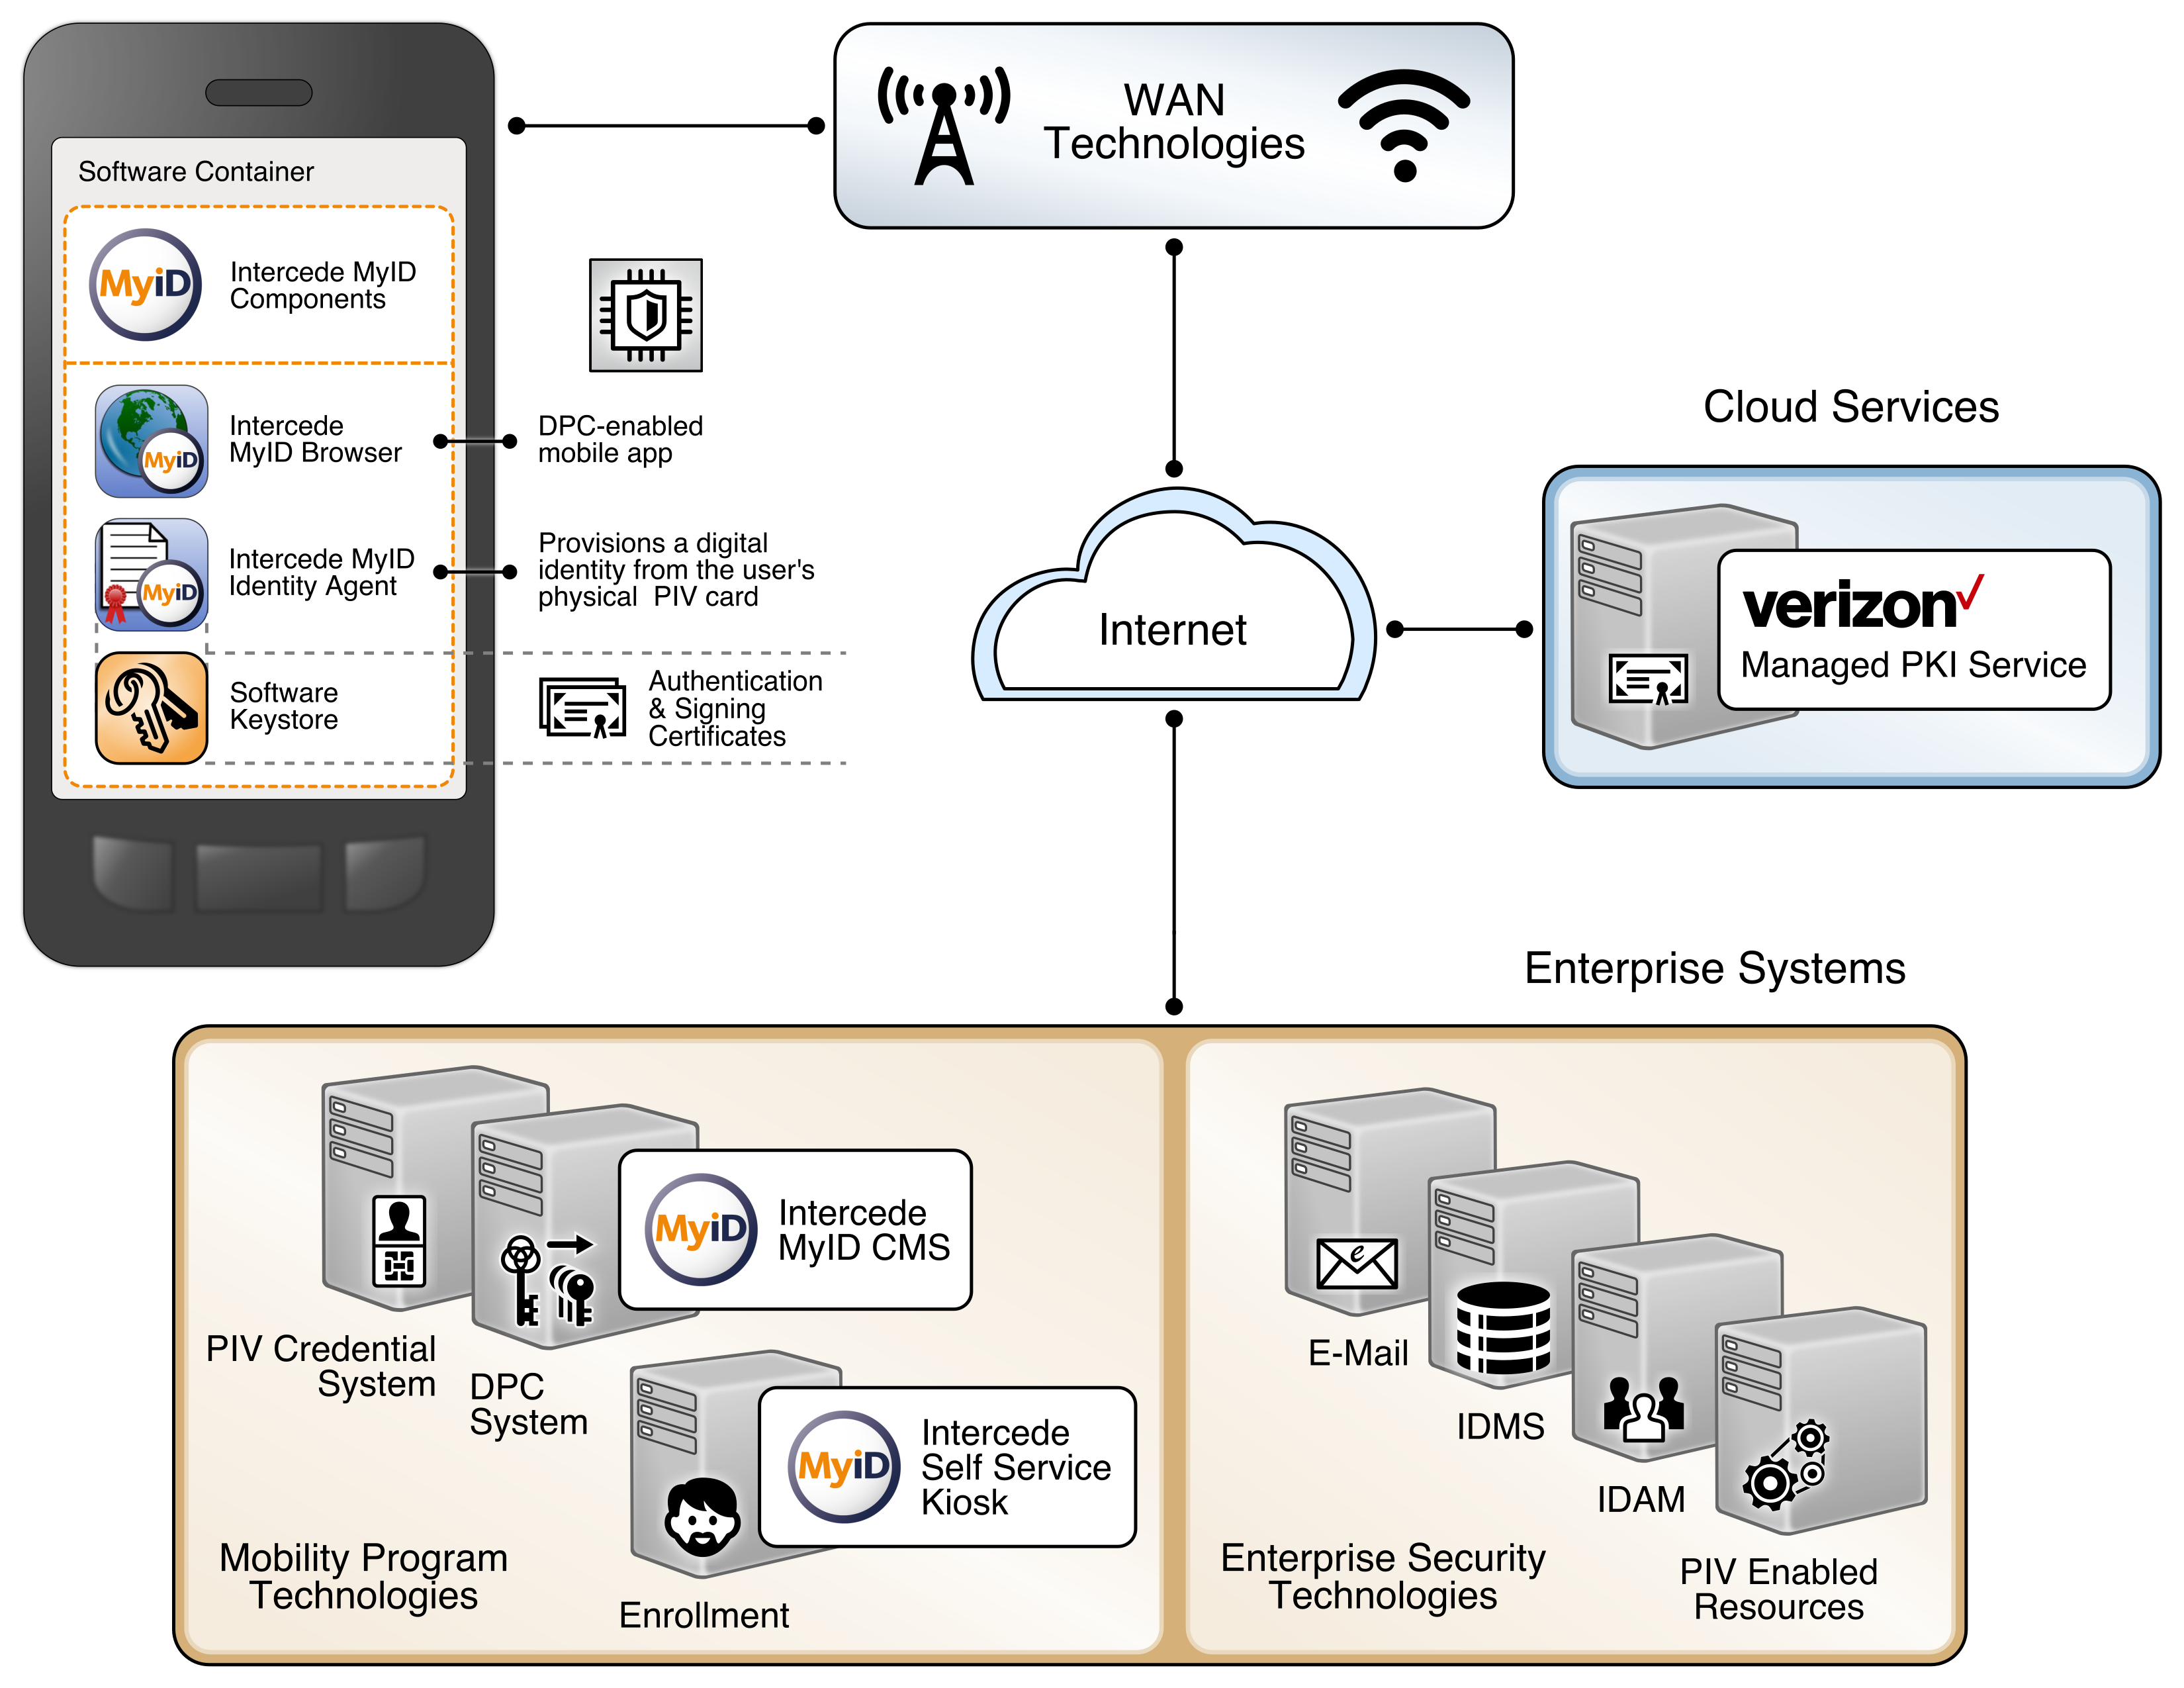 A visual depiction of the mobile device implementation. Here, the Identity Agent application is used to manage the DPC. The DPC Authentication key is stored in a software key store within the secure container. The supporting cloud and enterprise systems as described above are also shown.